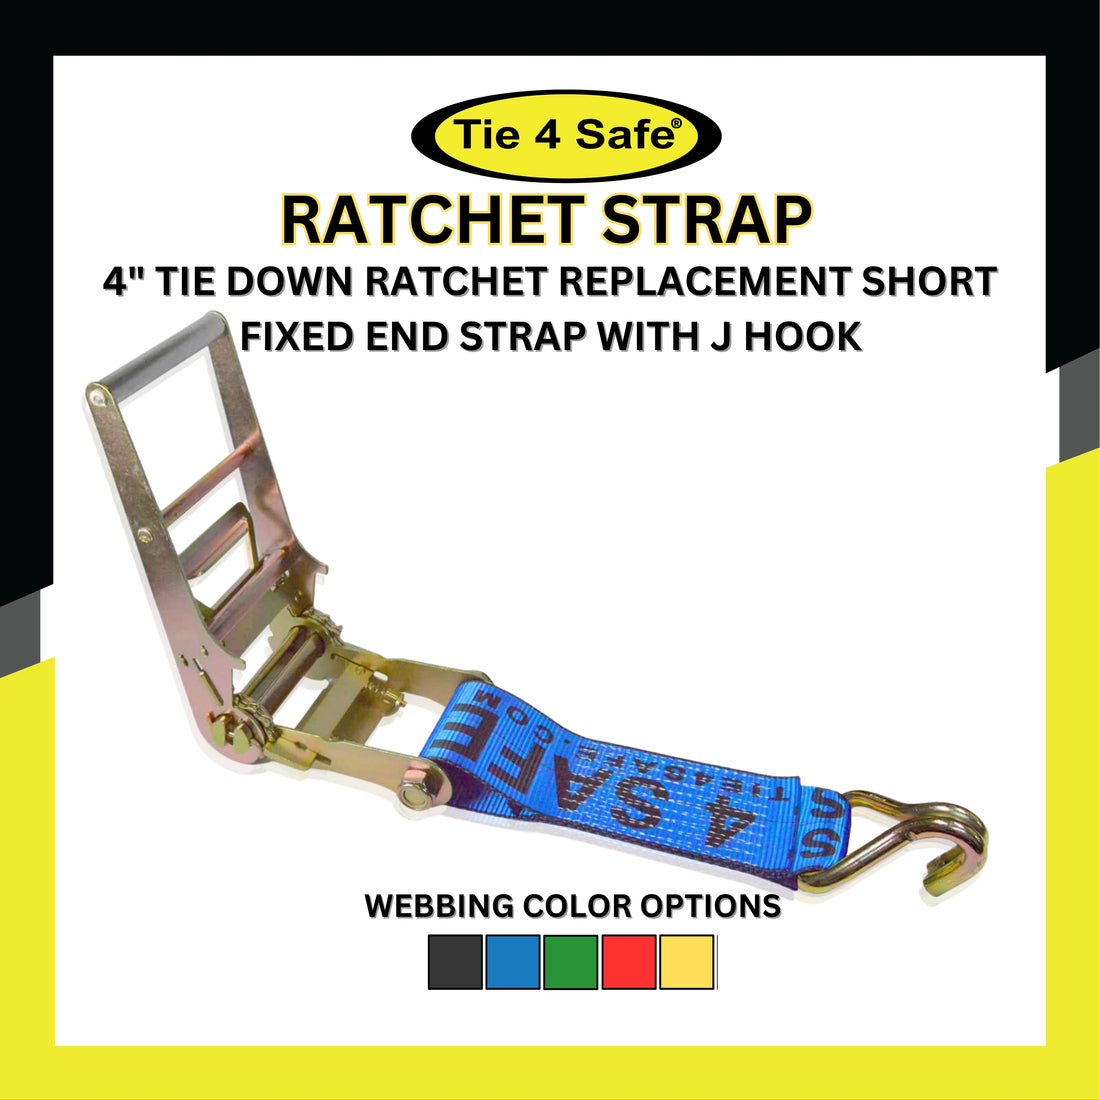 USA 3" & 4" Ratchet Tie Down Short Fixed End Strap With J Hook